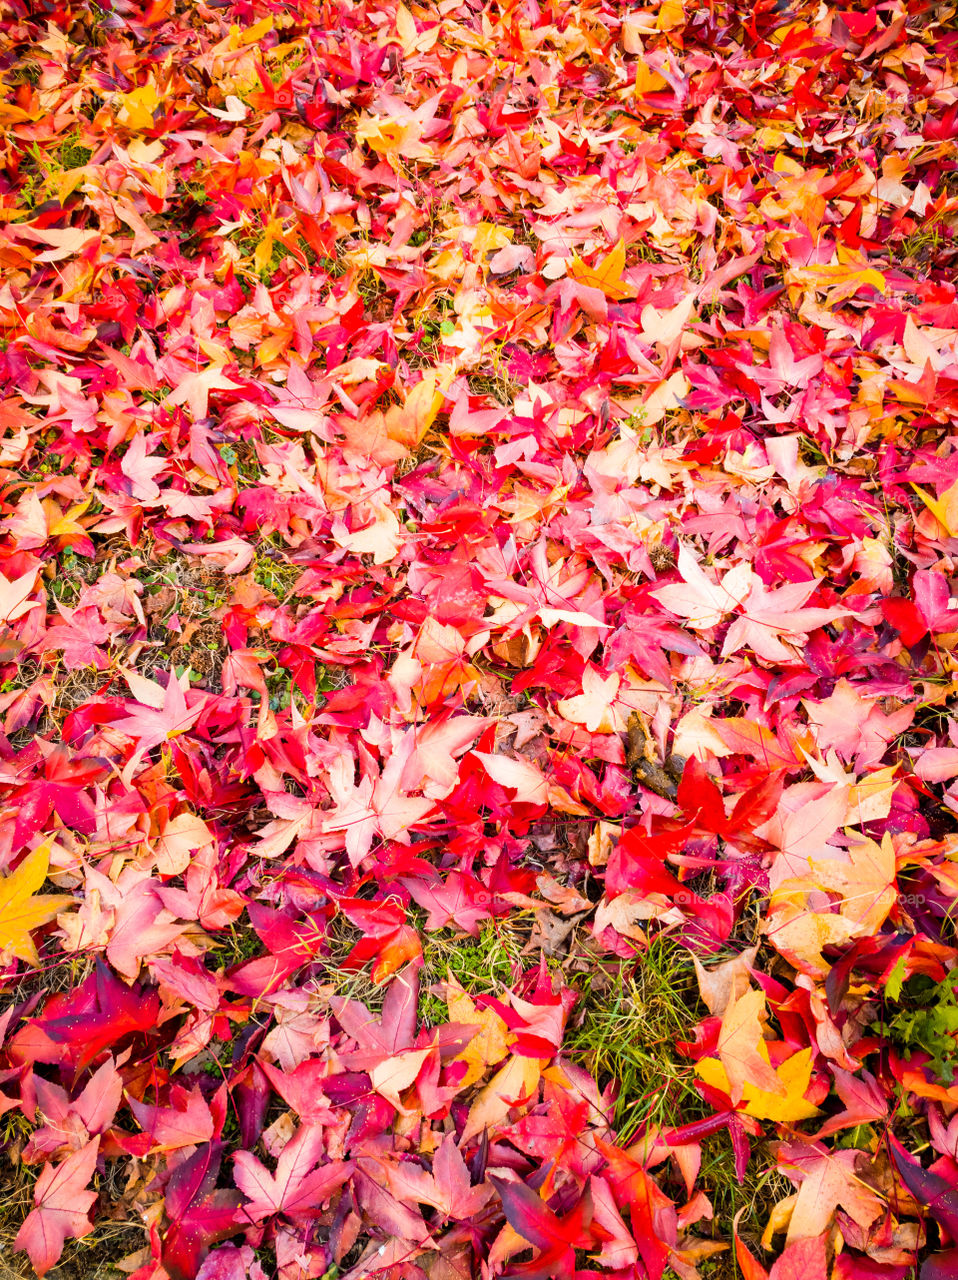 Red carpet of leaves in a urban garden fallen on the ground from a japanese maple in autumn